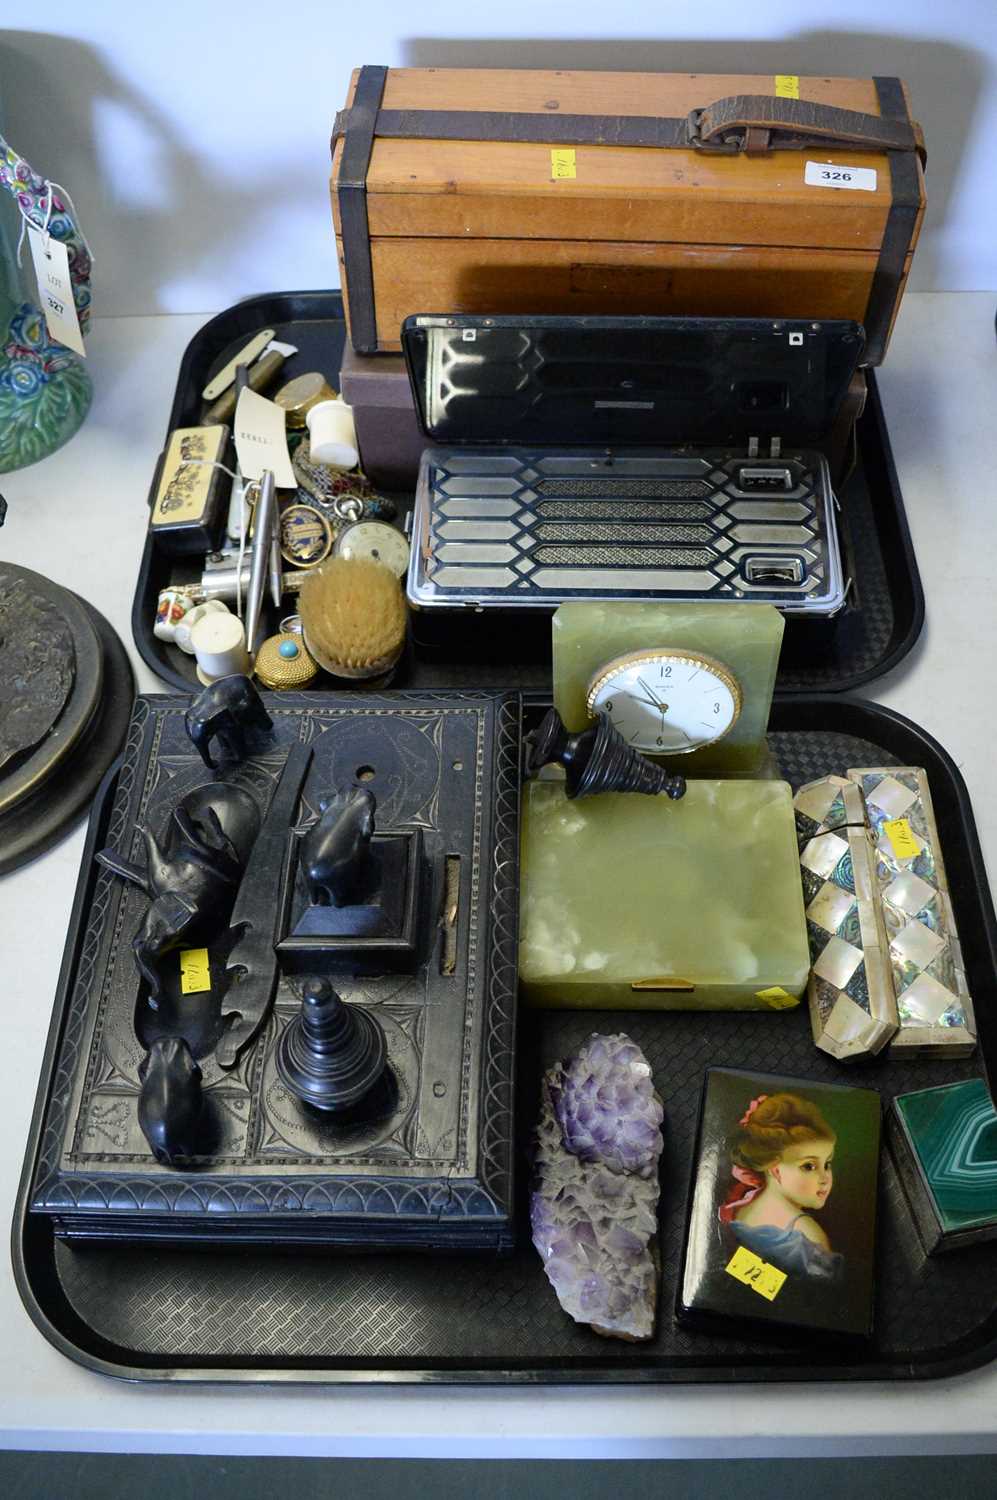 Lot 326 - A selection of desk and dressing table accessories.